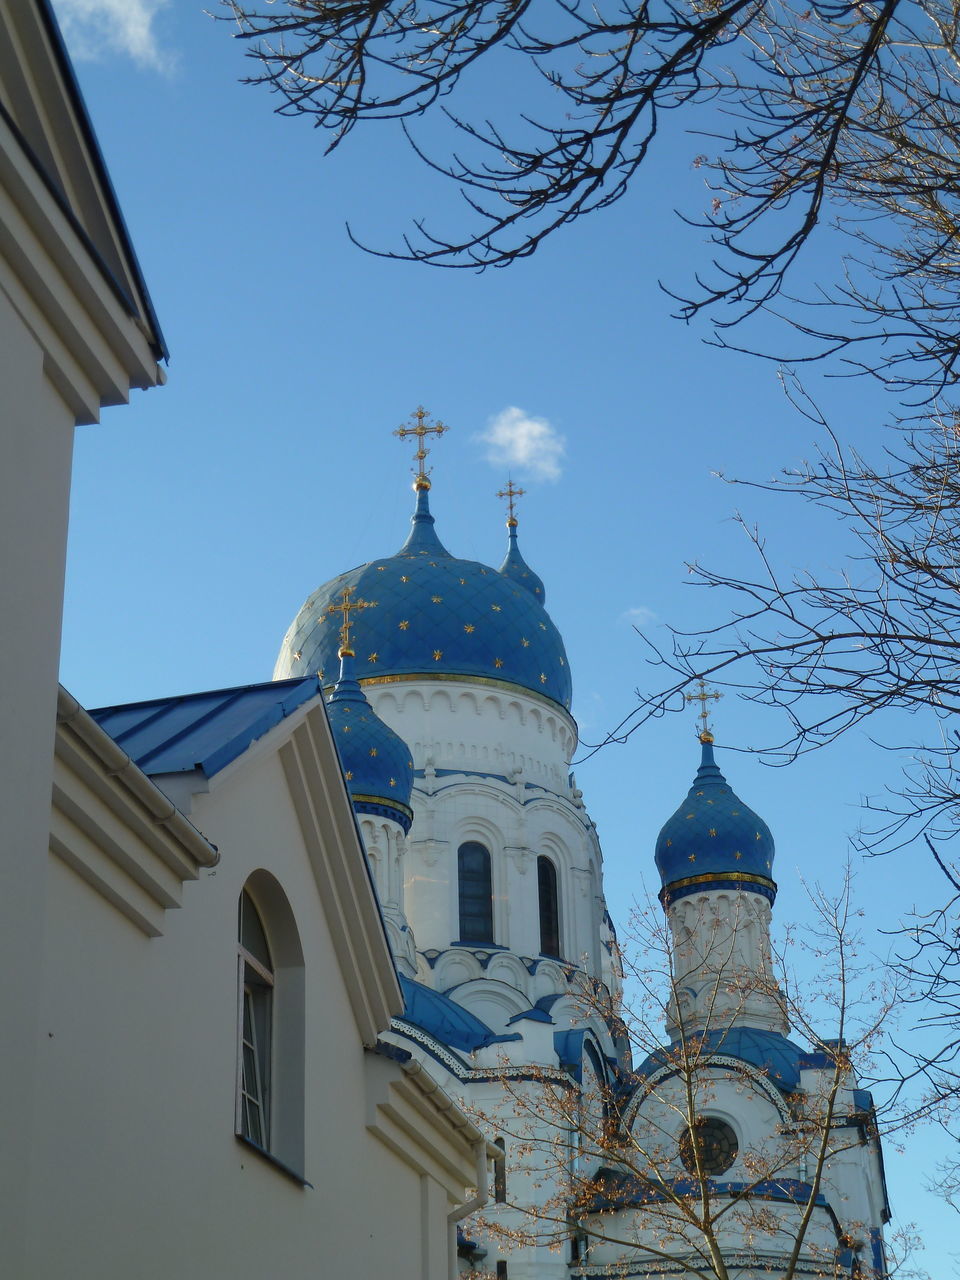 LOW ANGLE VIEW OF CHURCH AND BUILDINGS AGAINST SKY